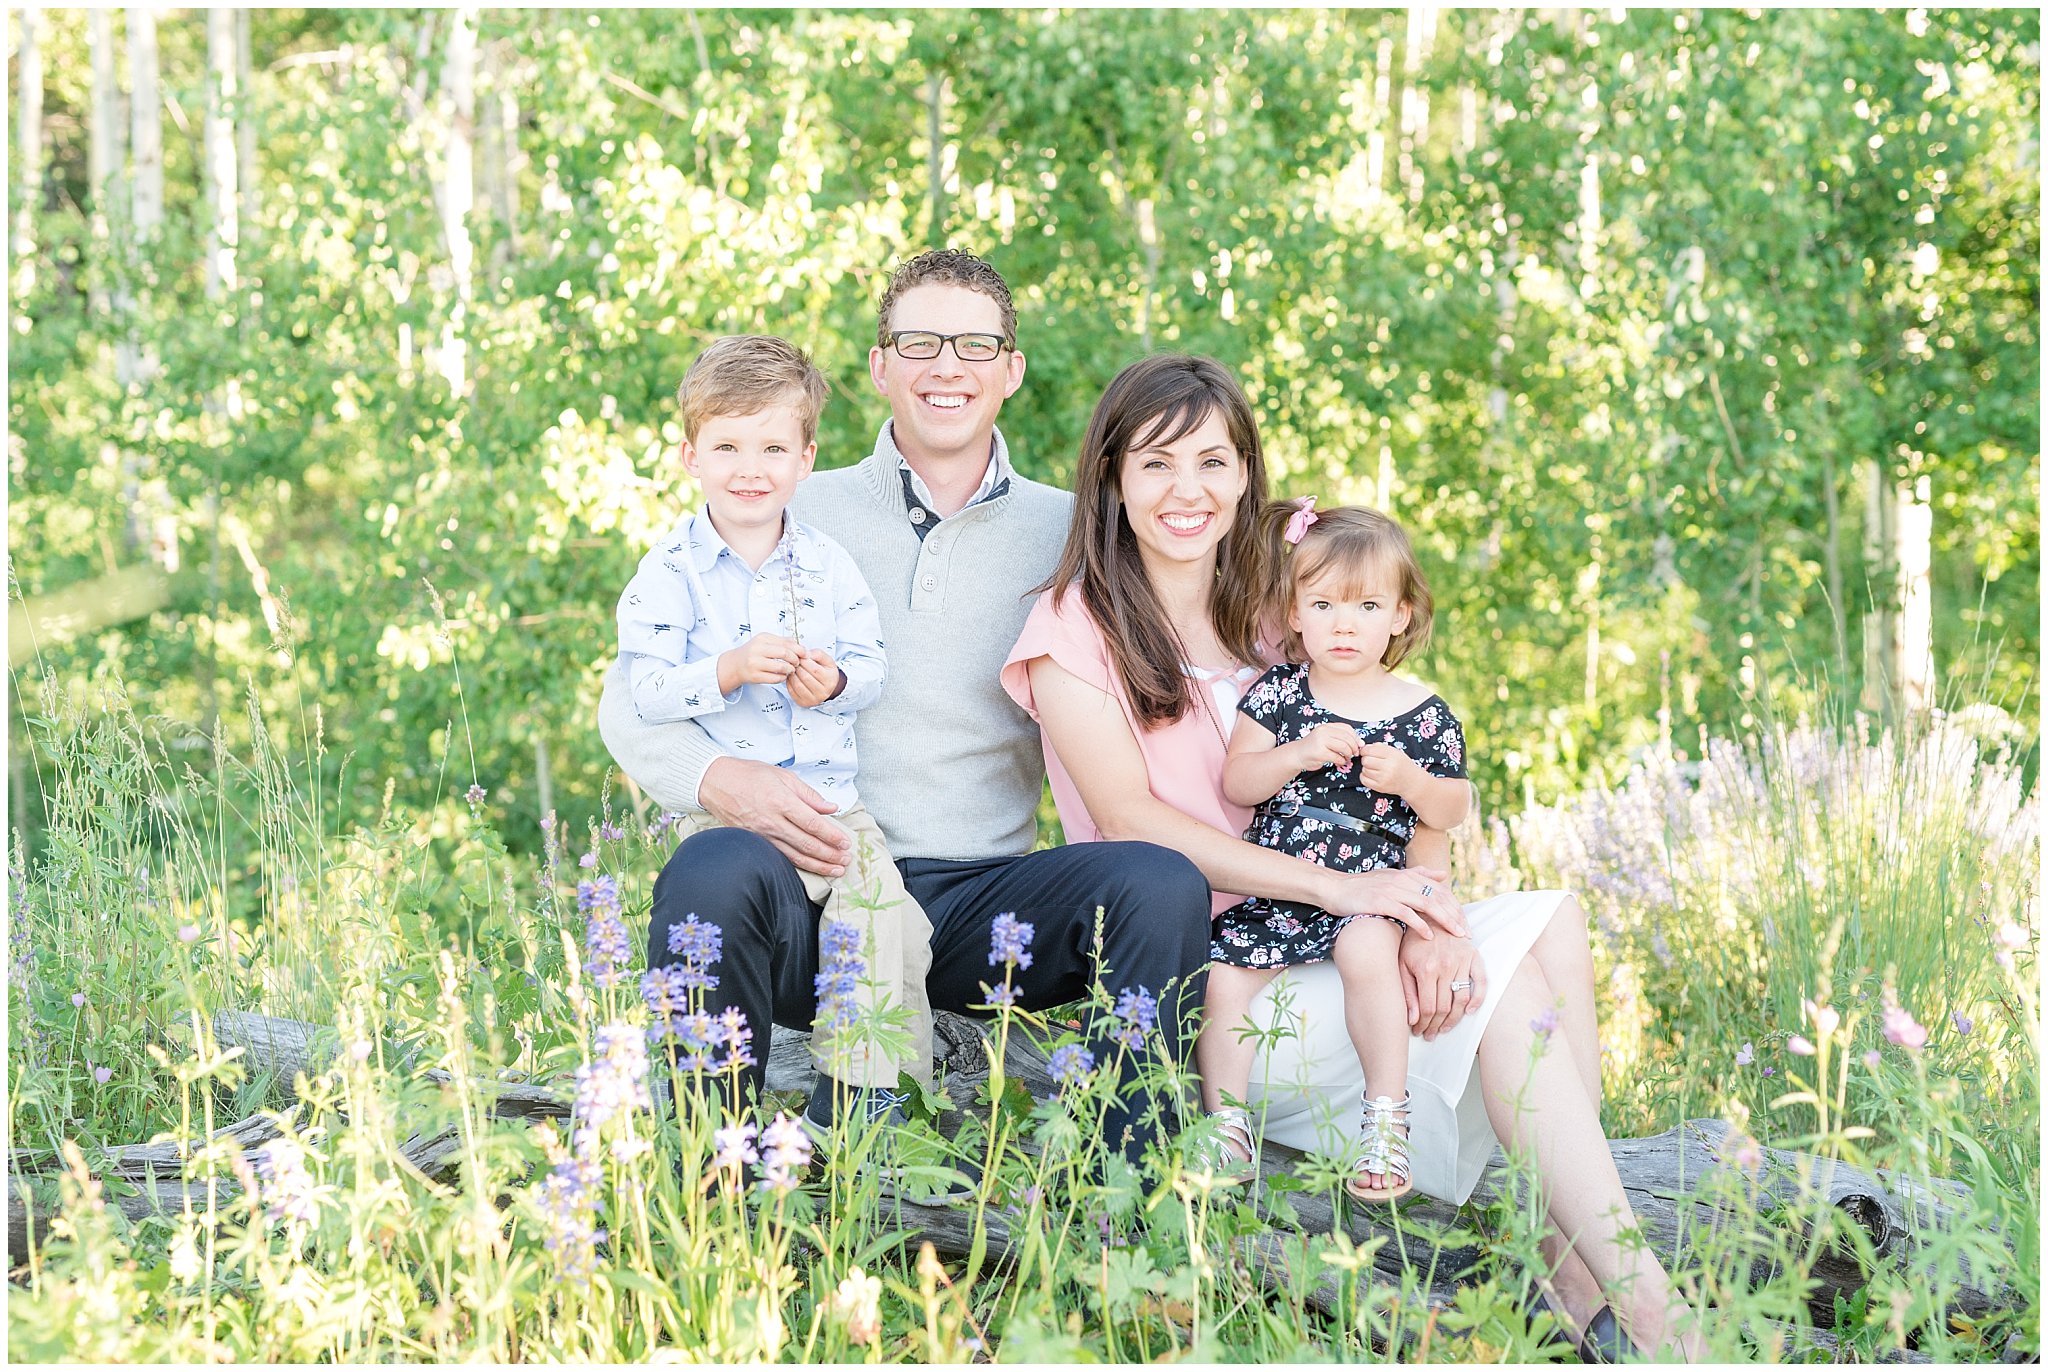 Family picture in the aspen trees in the mountains | Snowbasin, Utah